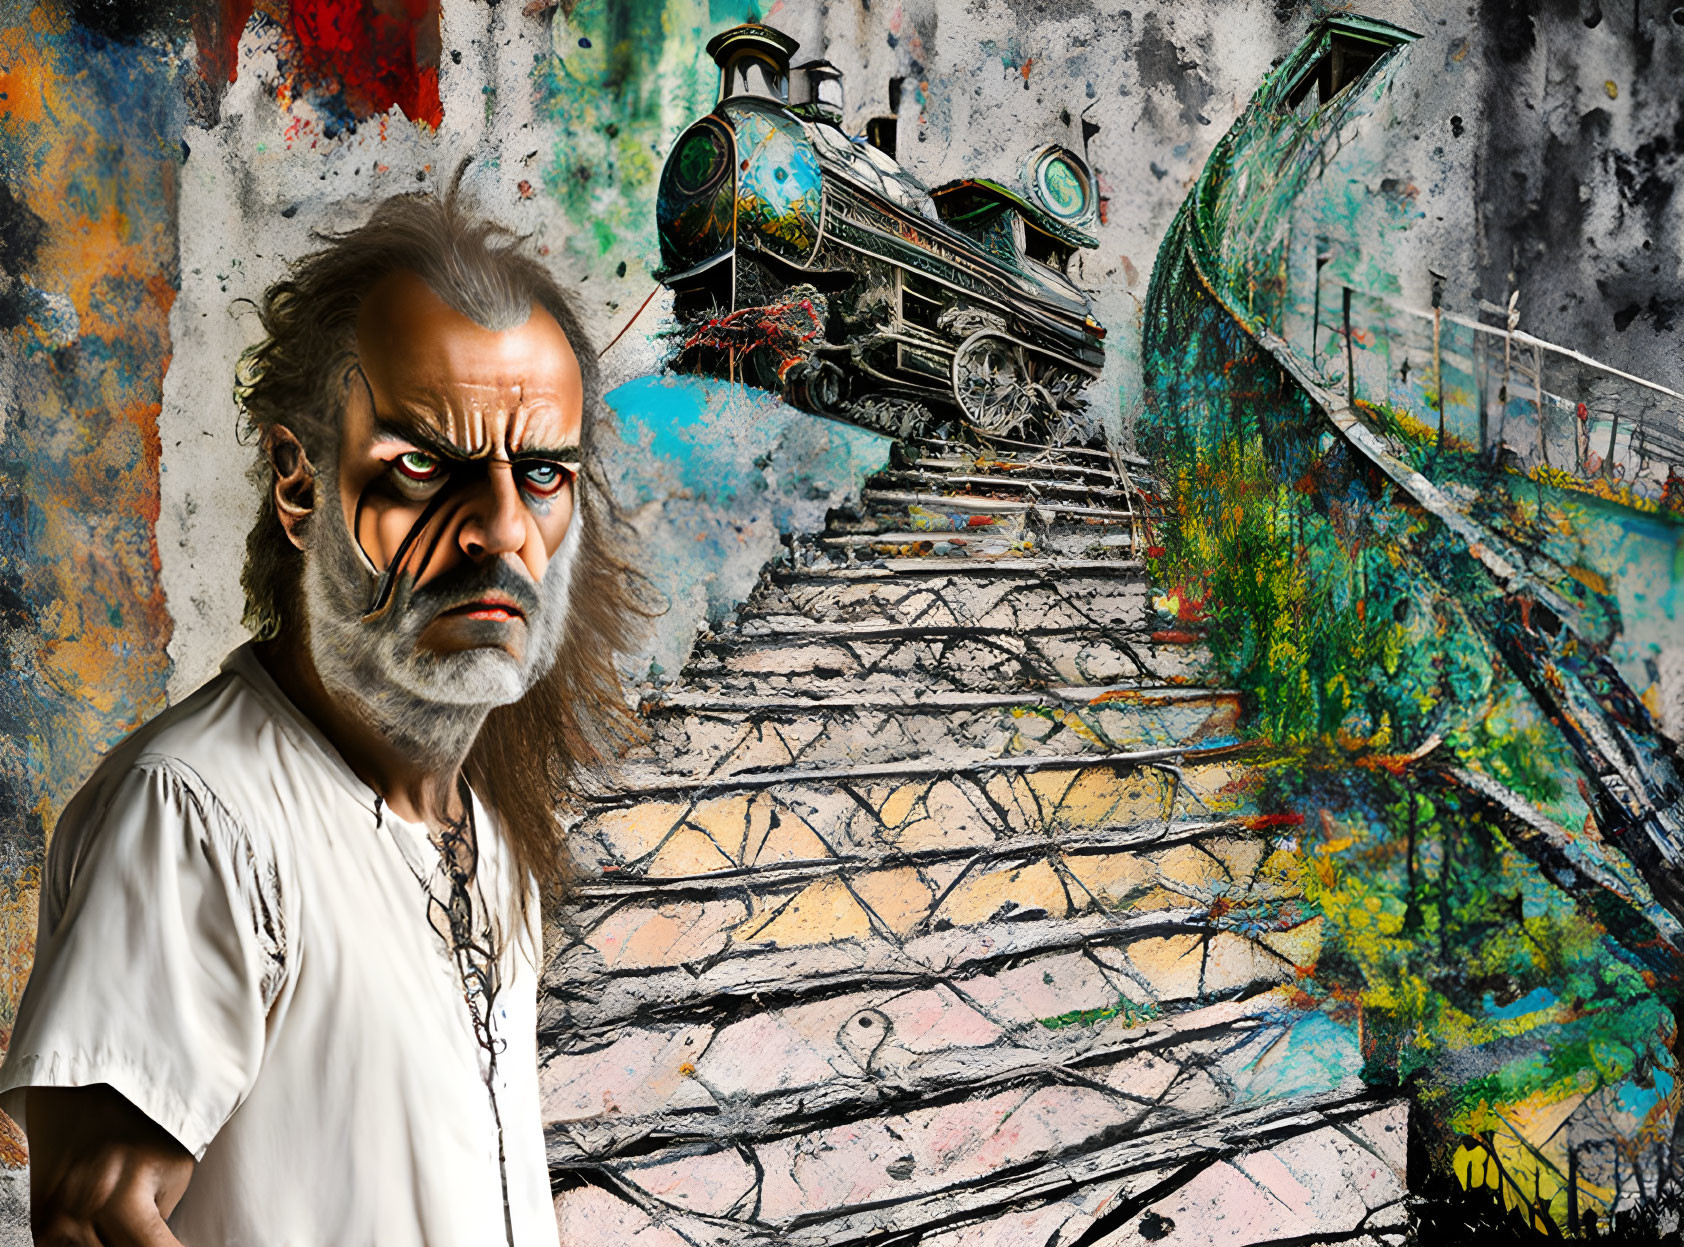 Bearded man gazes at colorful mural of steam locomotive